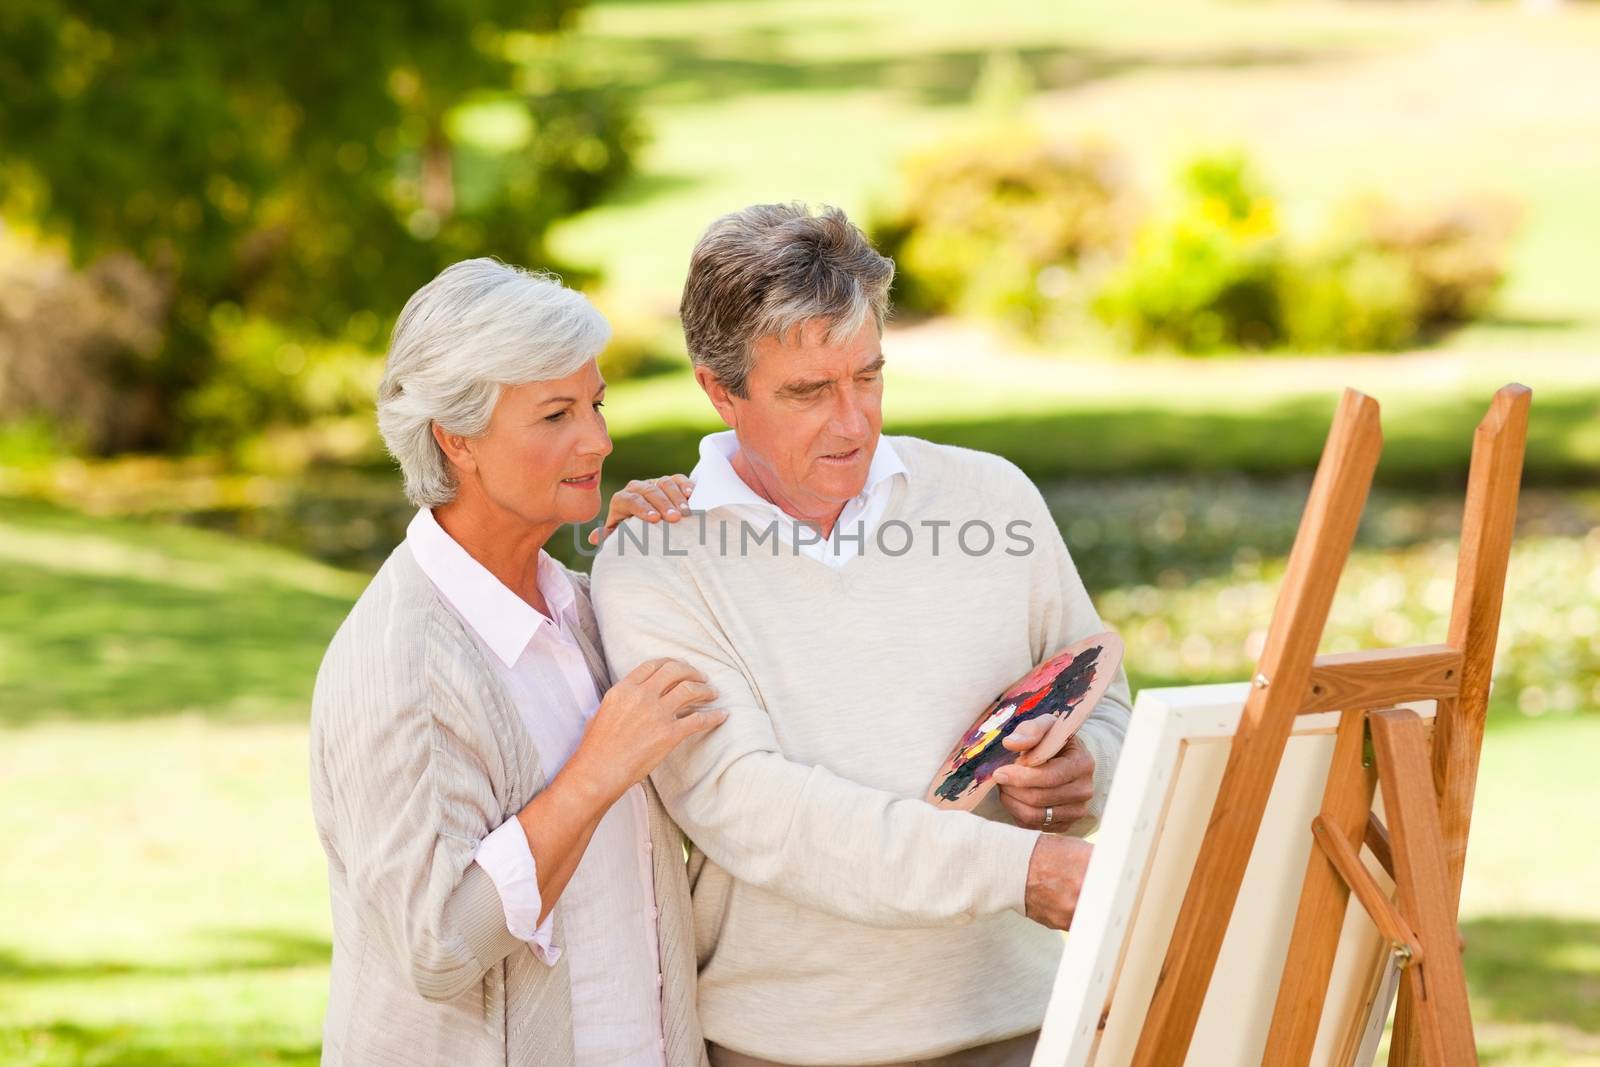 Retired couple painting in the park by Wavebreakmedia